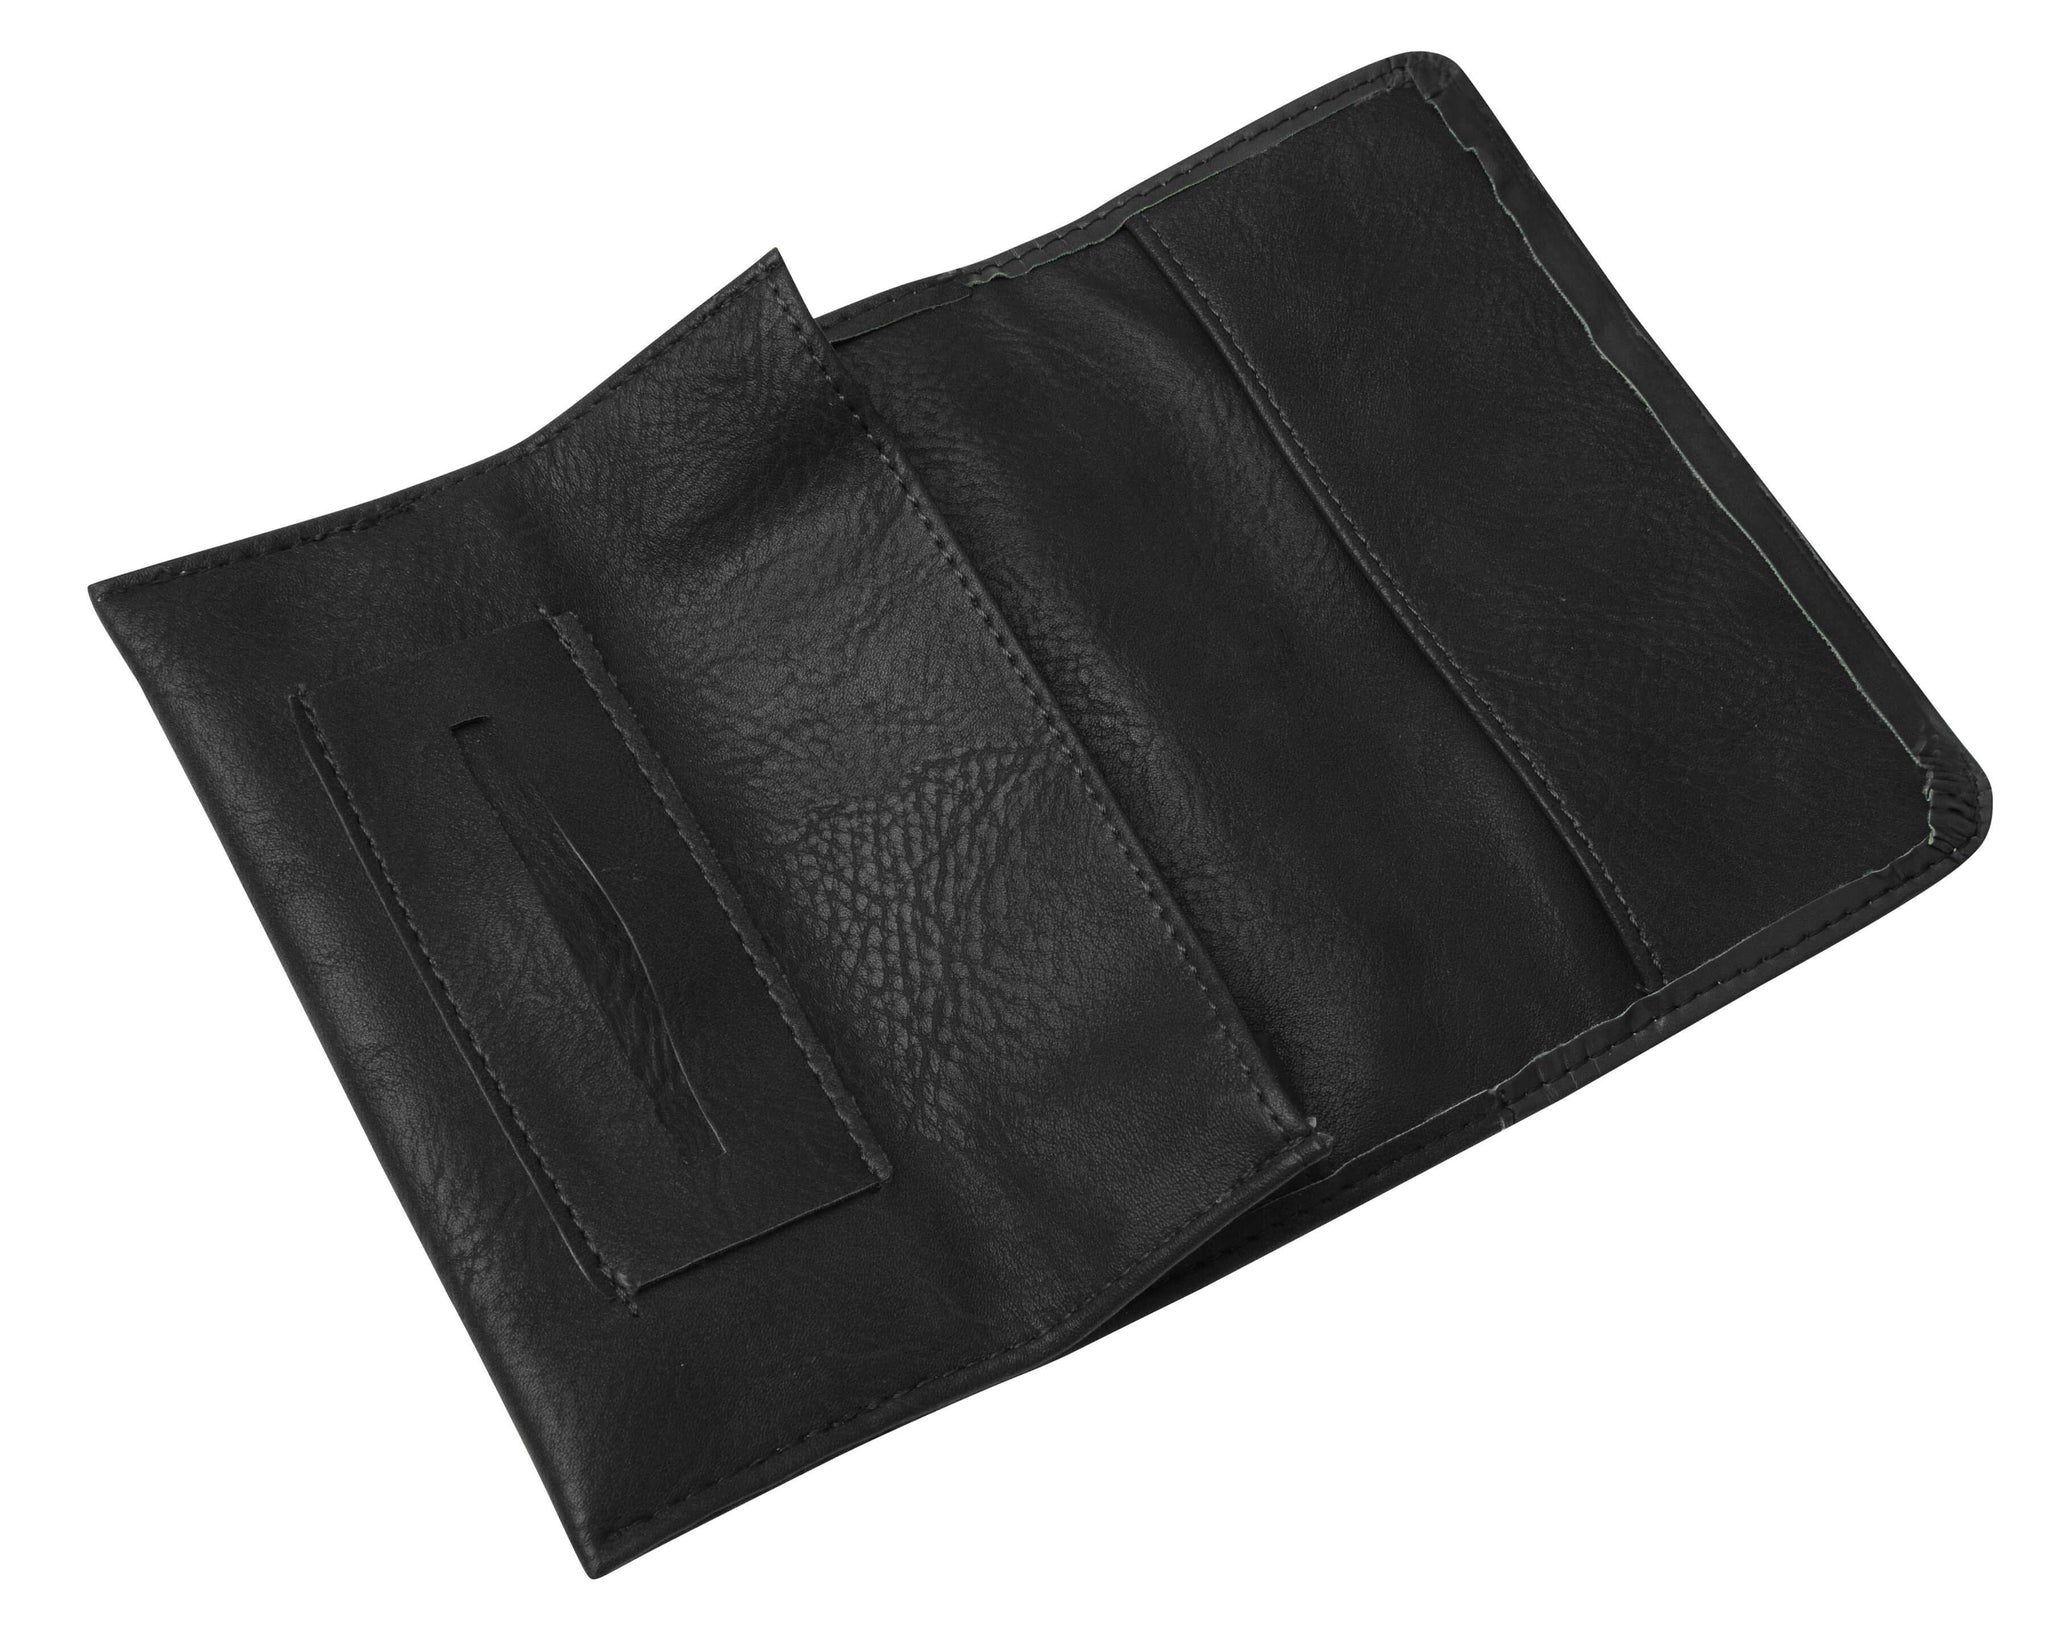 Black Leather KAYWOODIE Combo Tobacco Pouch - Discounted.